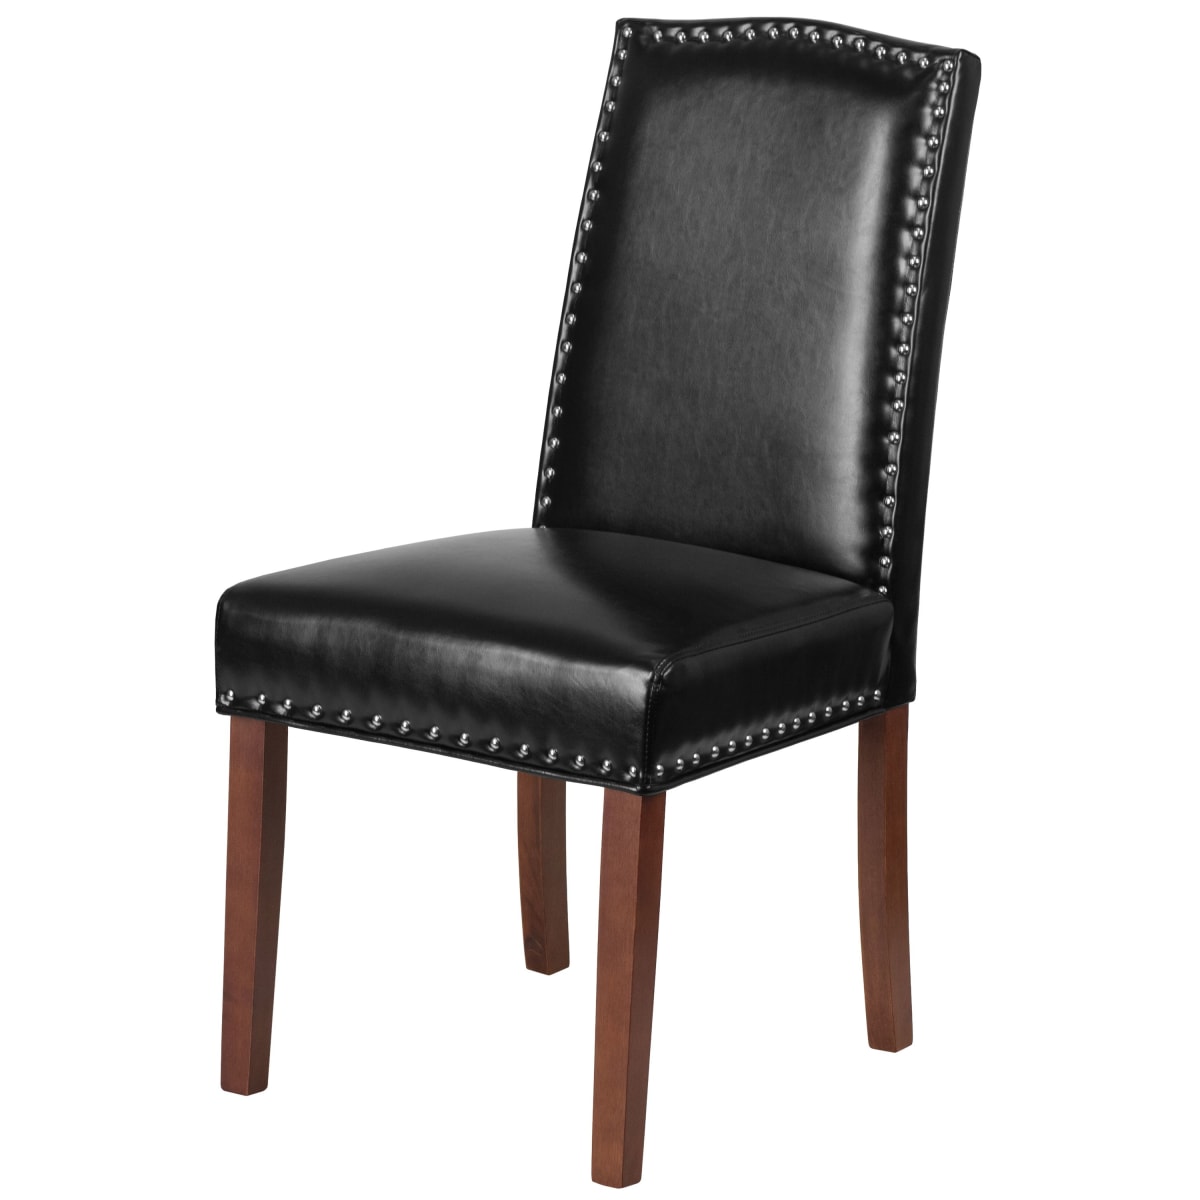 Delacora Qy A13 9349 Bk Gg Contemporary, Parsons Faux Leather Chairs